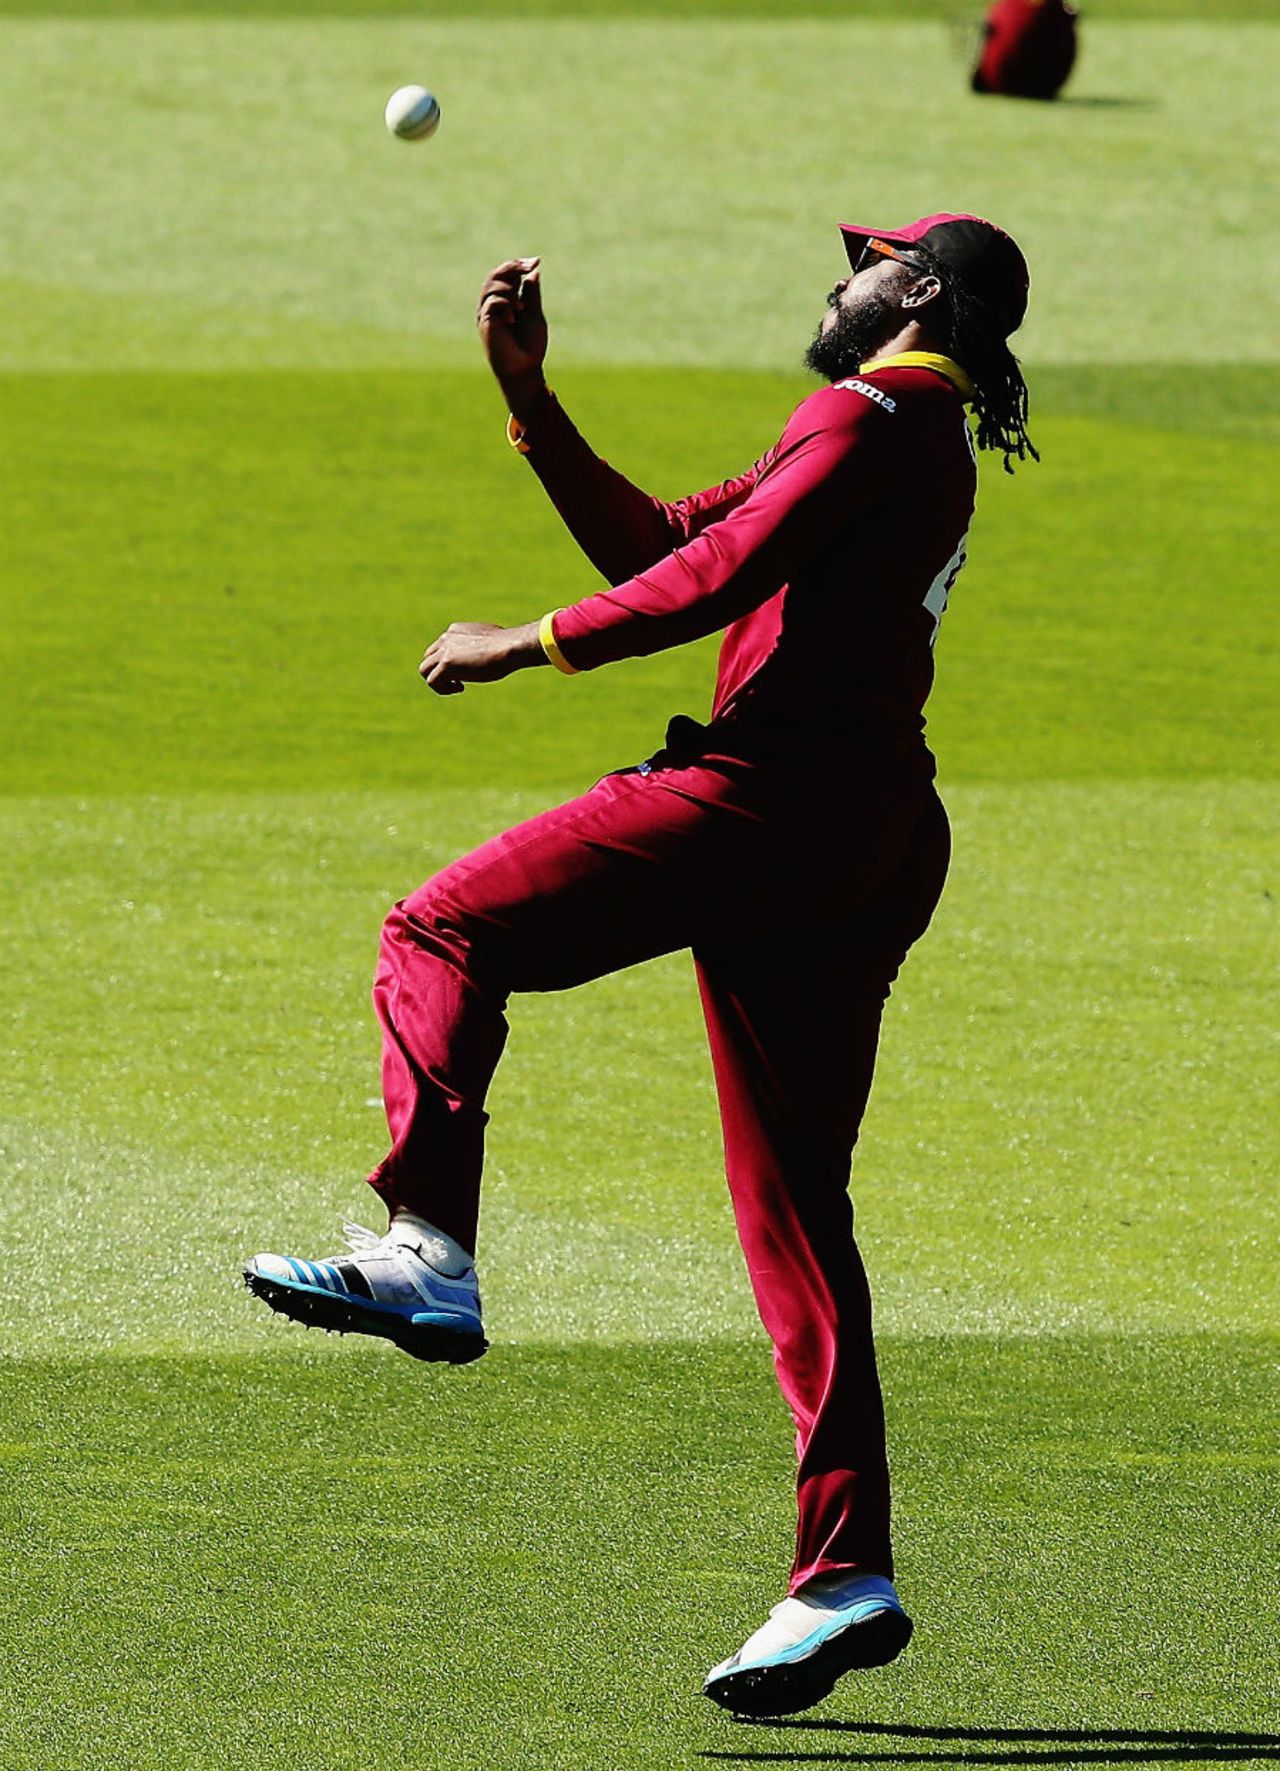 Chris Gayle took a juggling catch at cover to dismiss Kane Williamson, New Zealand v West Indies, World Cup 2015, 4th quarter-final, Wellington, March 21, 2015 